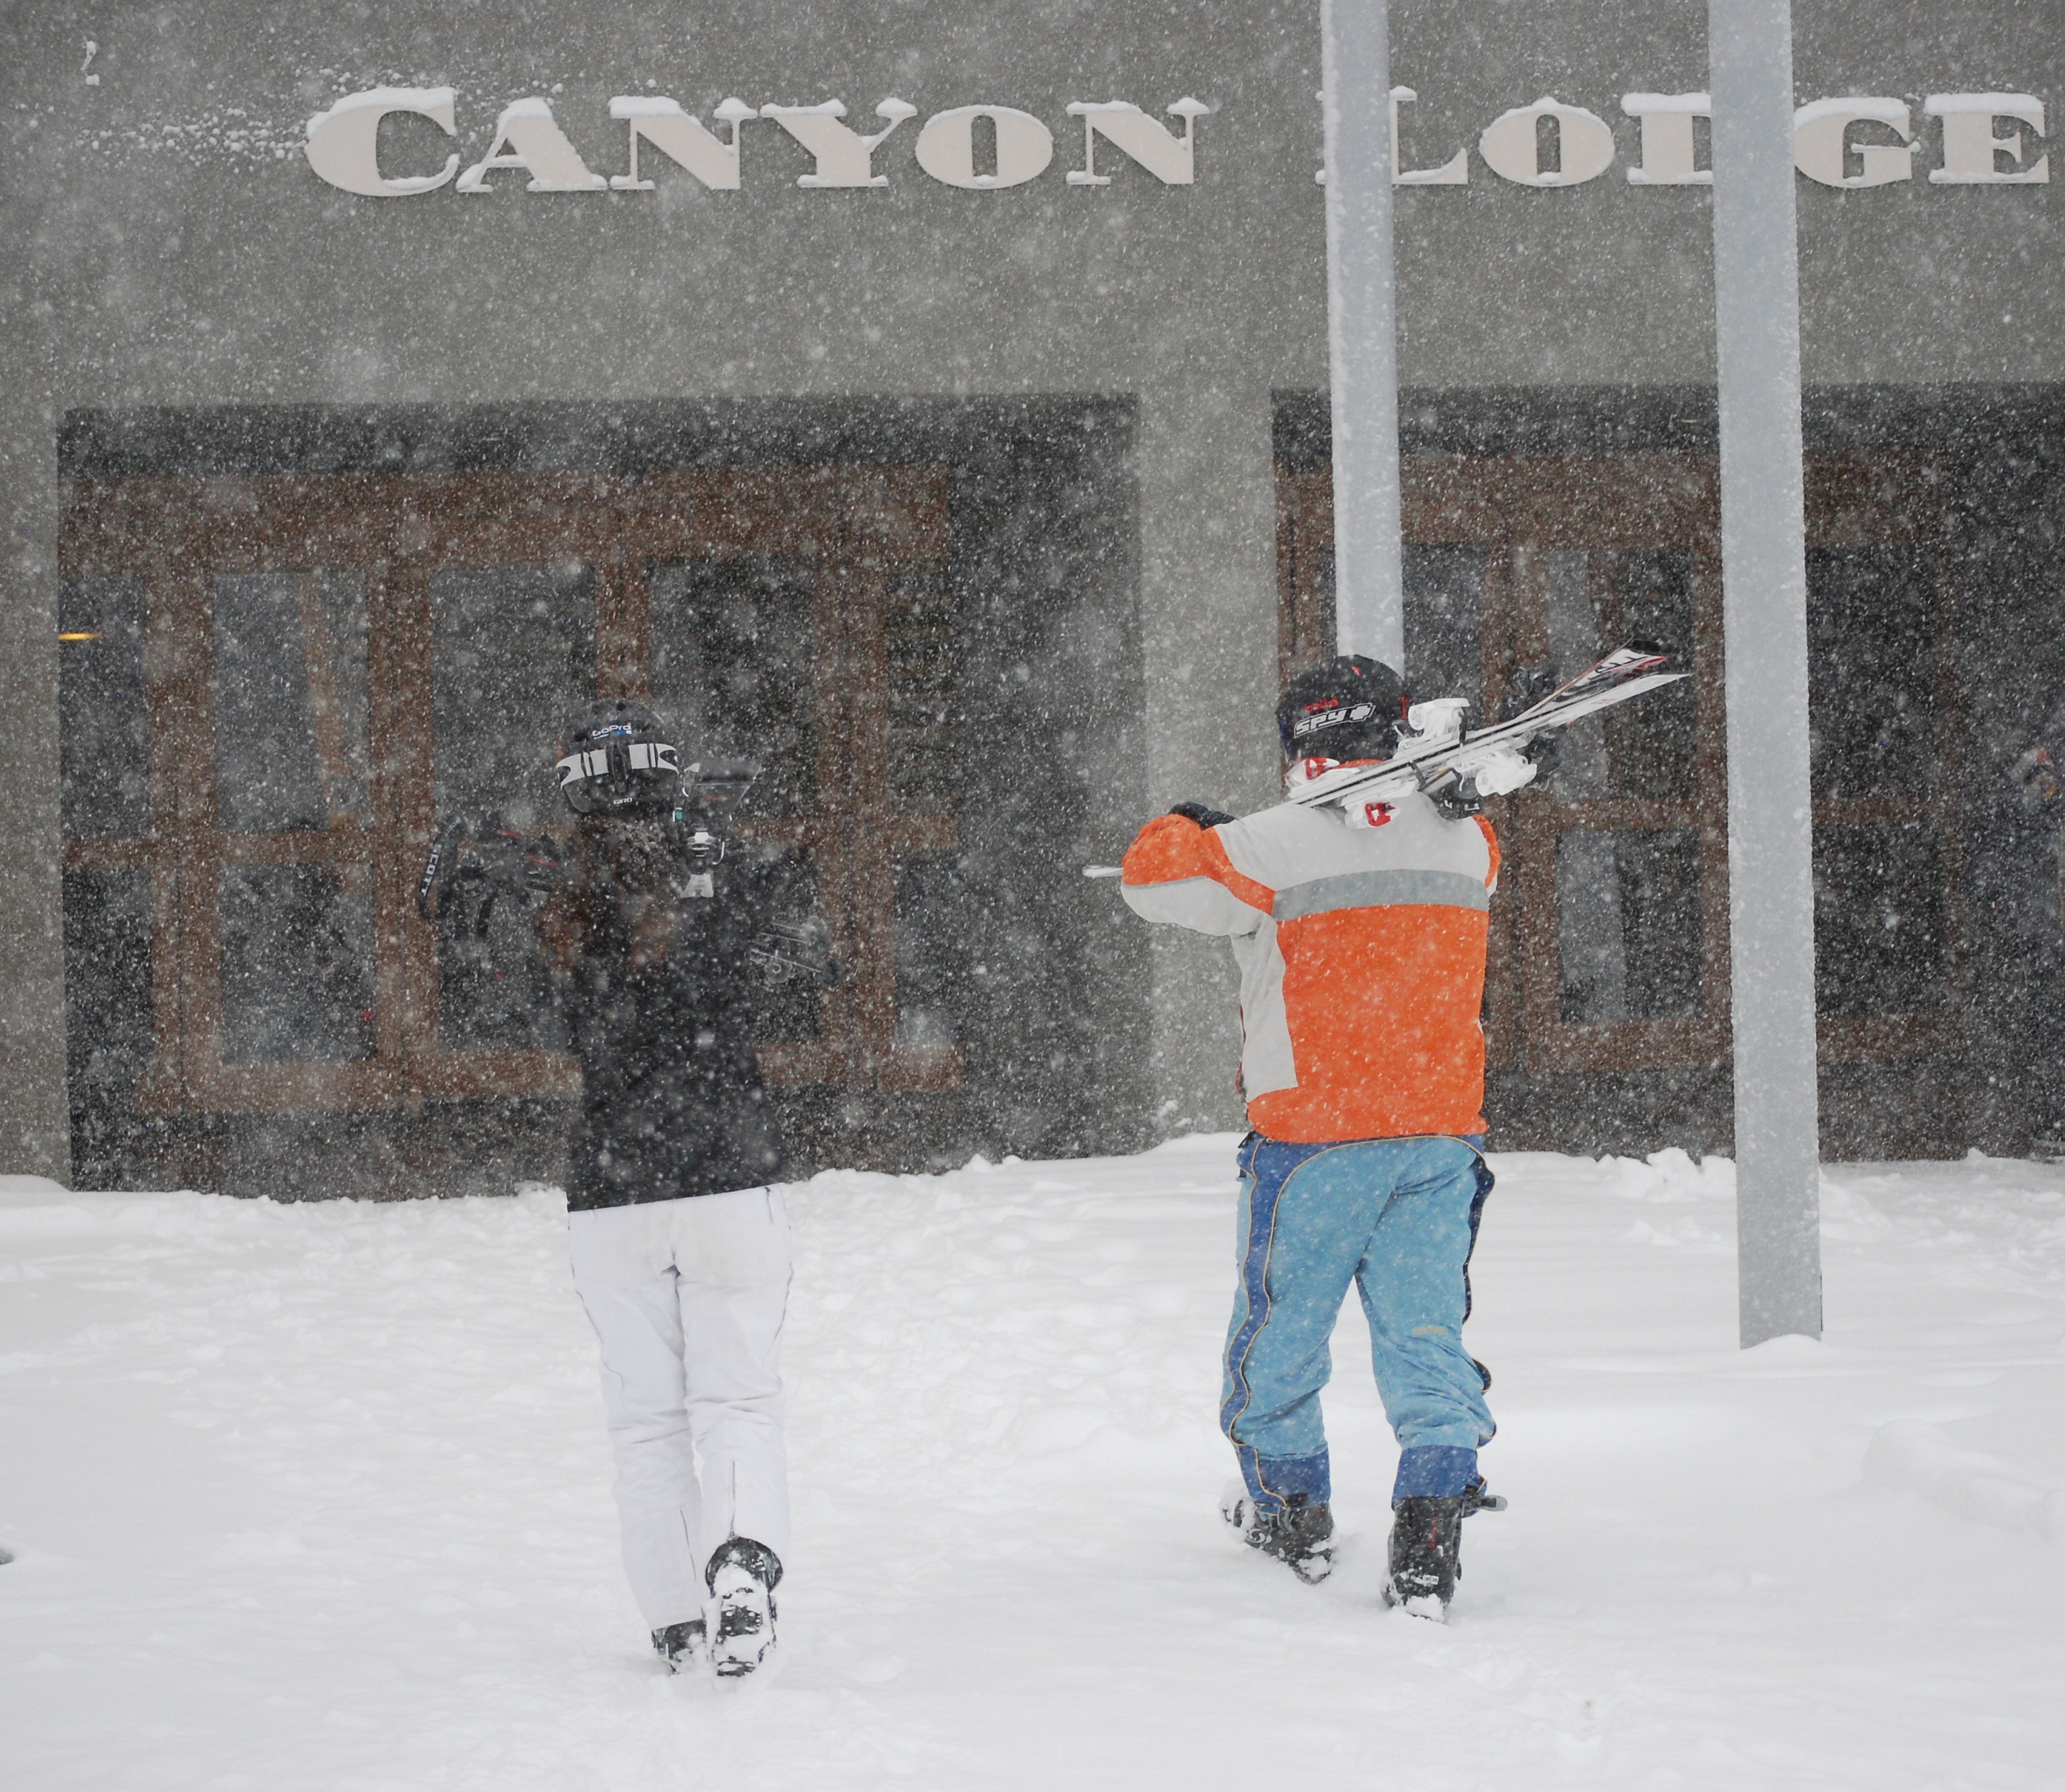 A snowy – and welcome – scene this morning at Mammoth Mountain's Canyon Lodge. (Mammoth Mountain Ski Area photo)